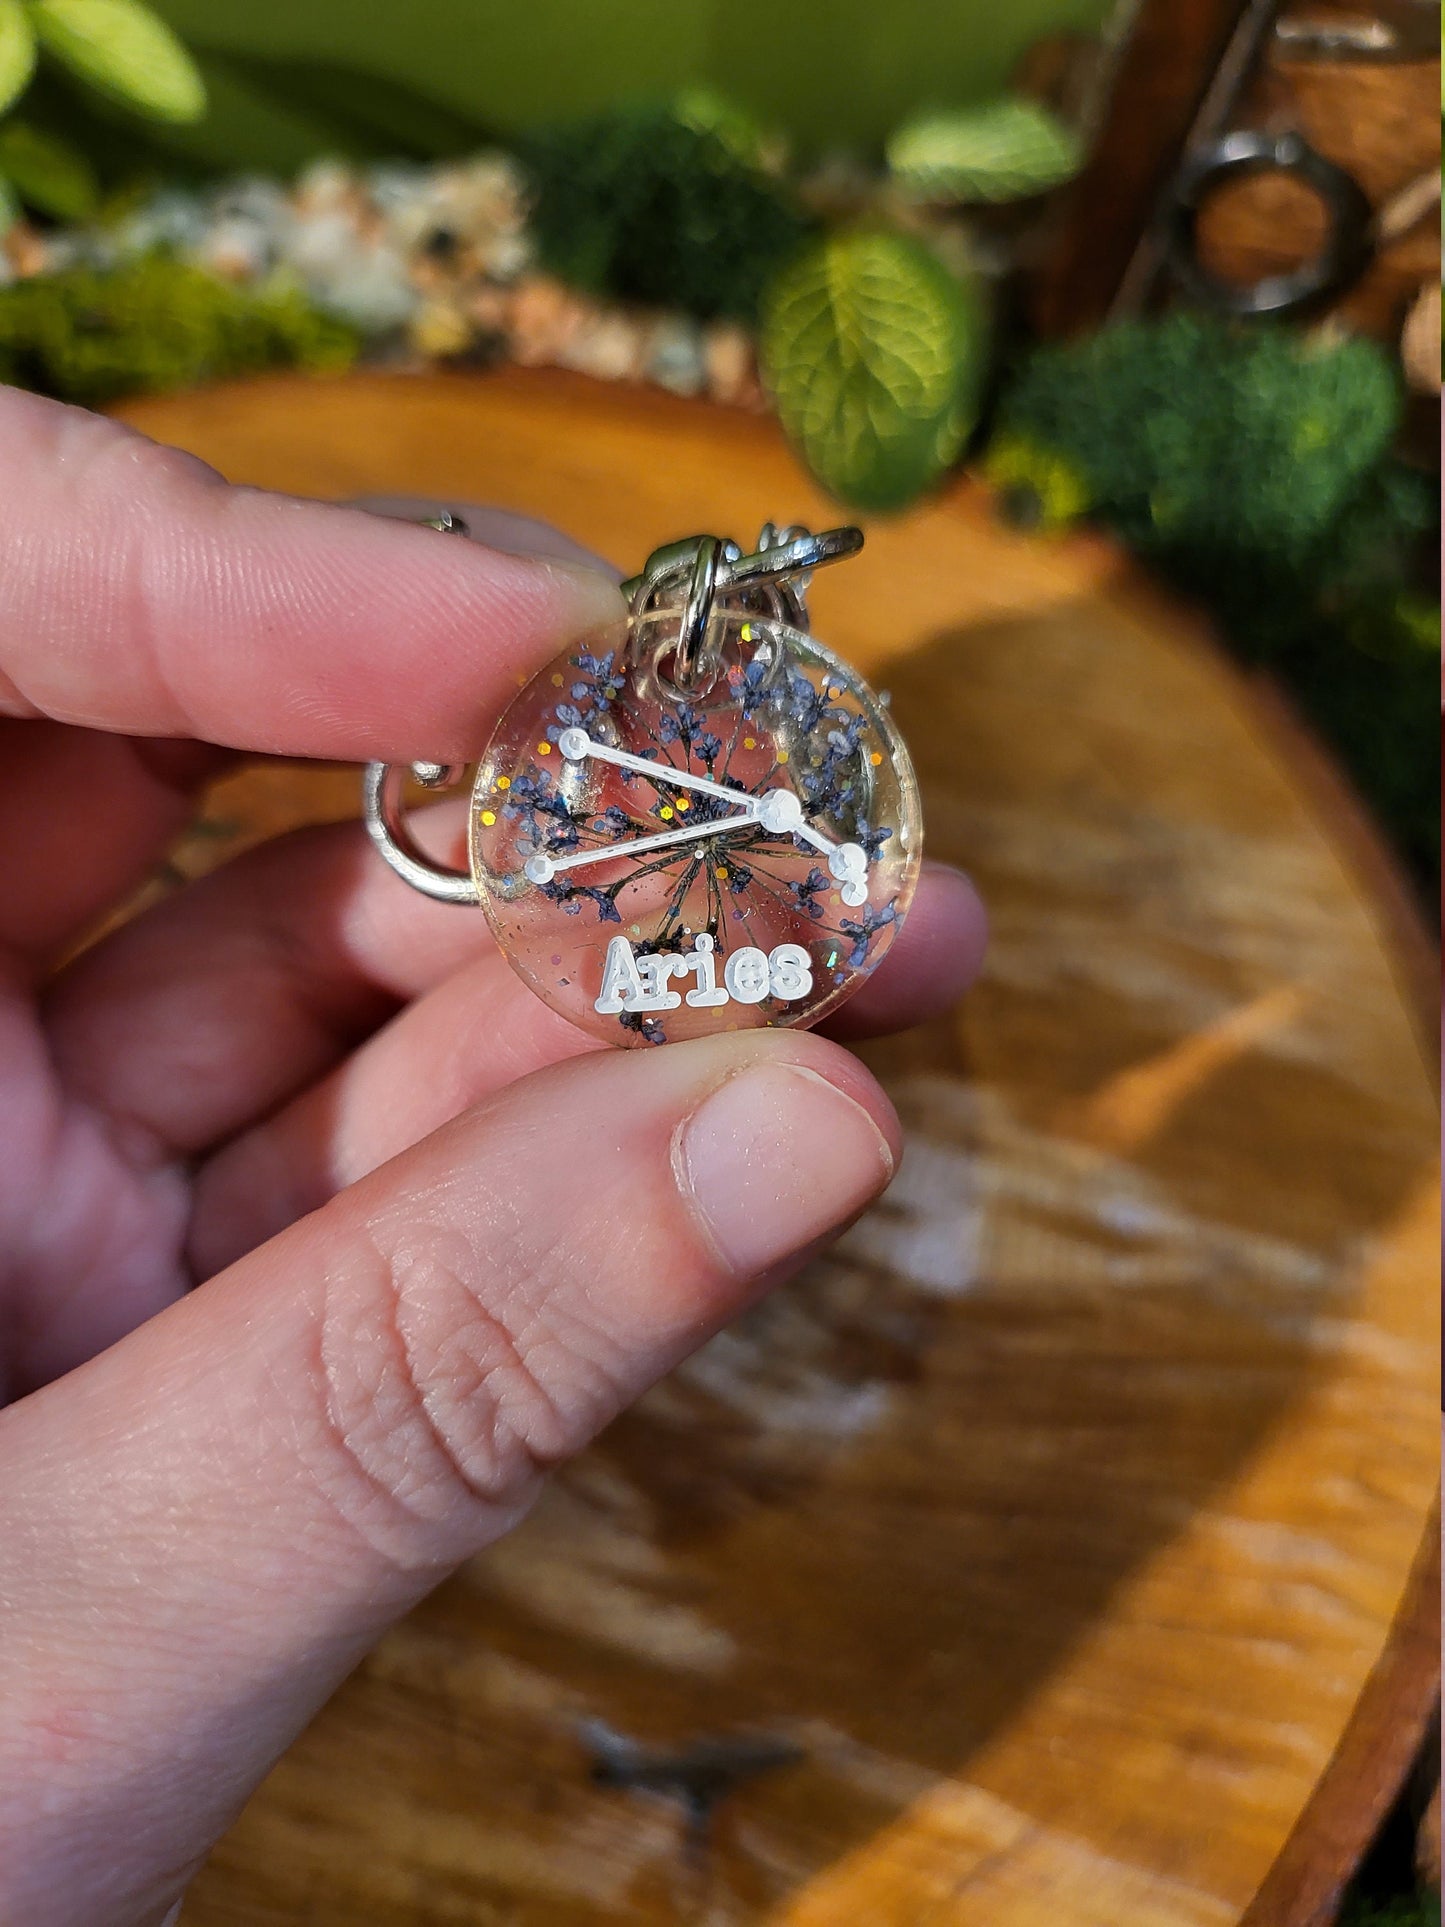 Botanical and Glitter Astrological Keychains with Charms